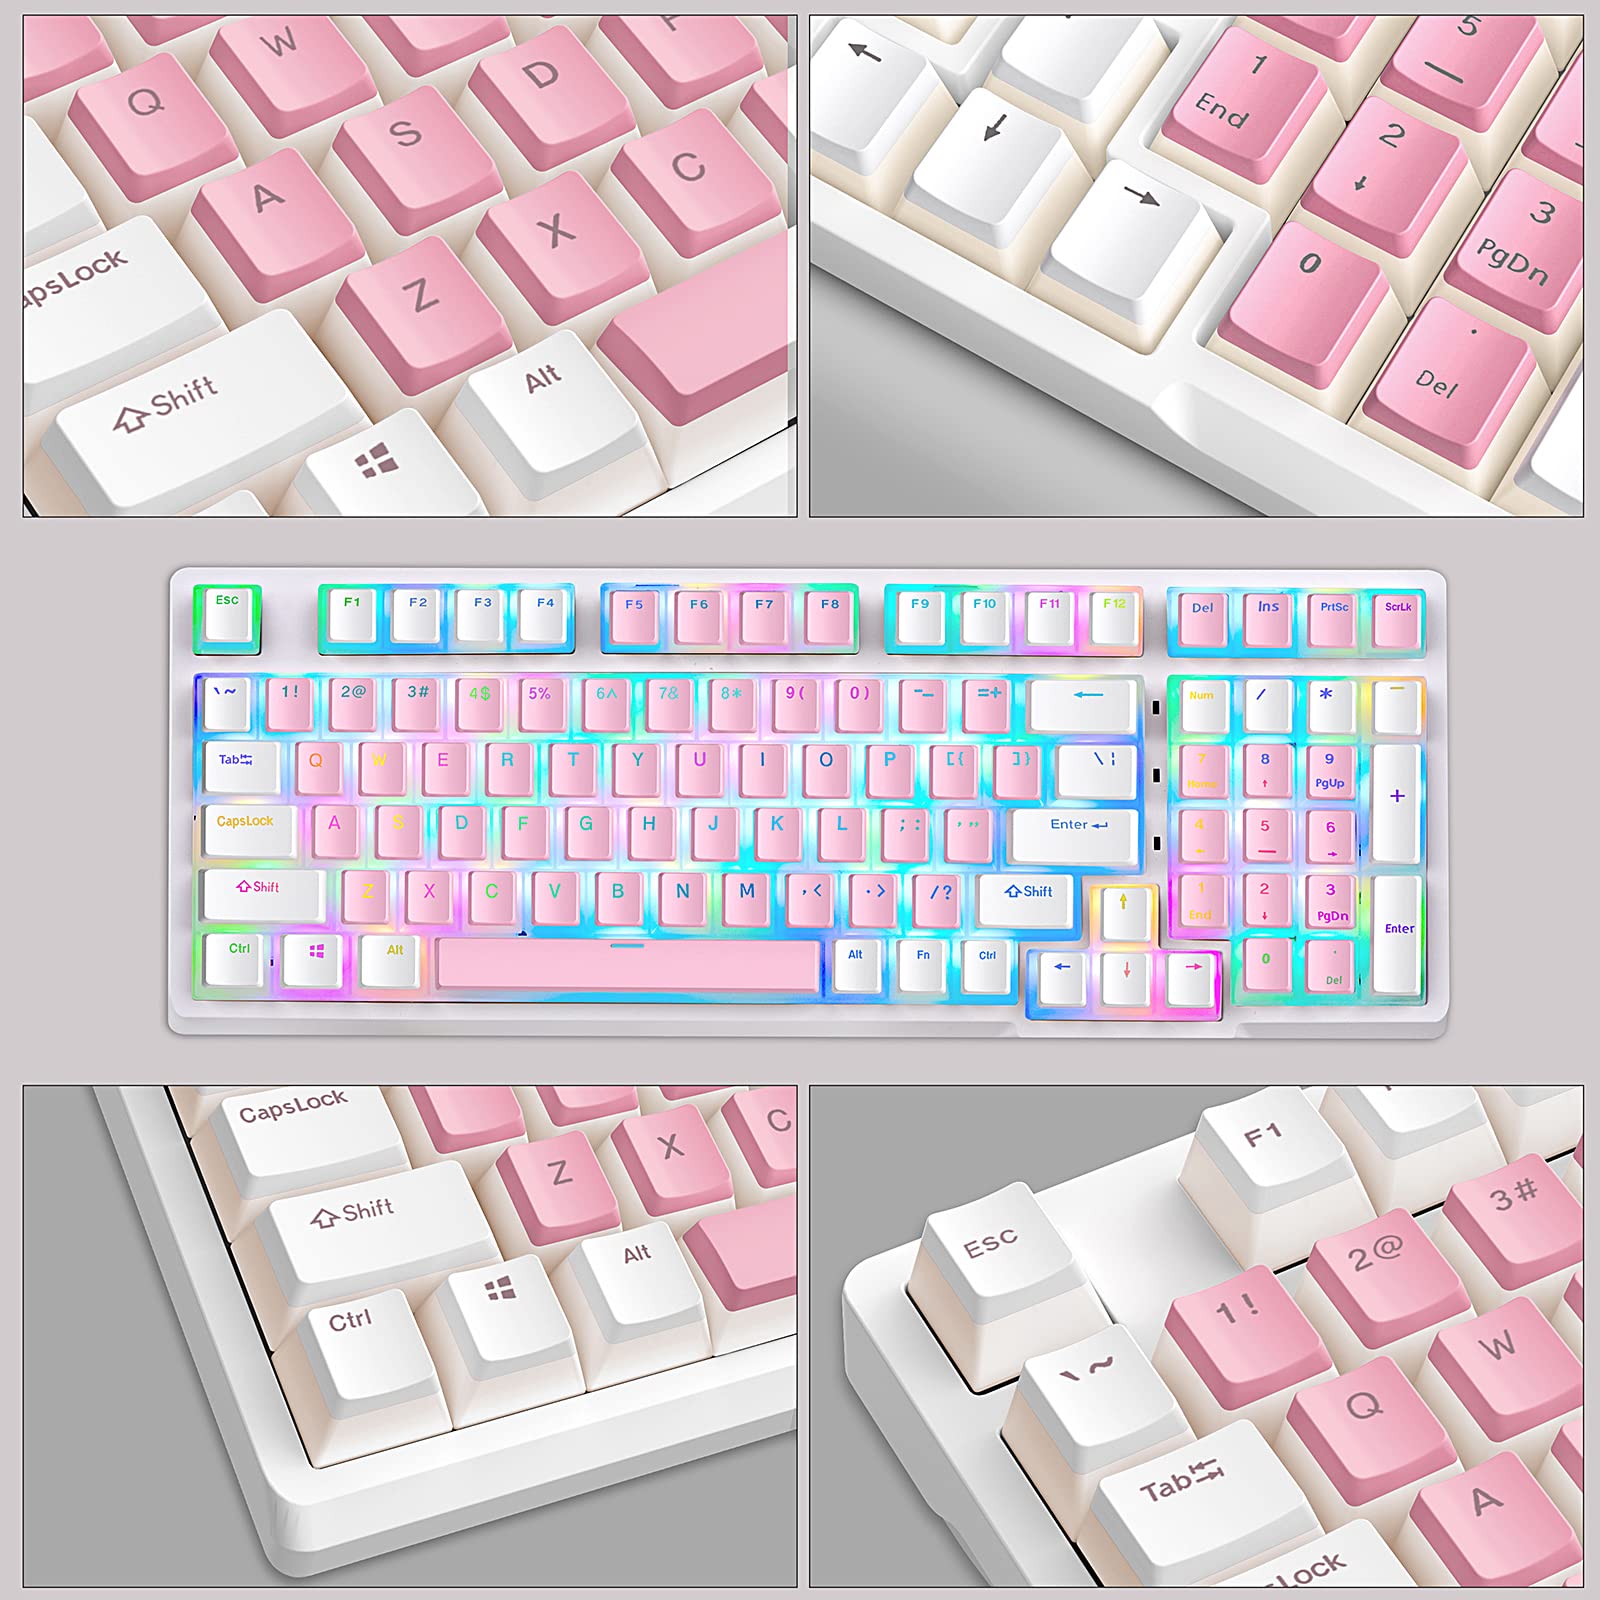 KOLMAX 98-Key RGB Hot-swappable Mechanical Gaming Keyboard, 2.4G Wireless/BT5.0/Wired with PBT Double-Shot Pudding Keycaps Pink-White Gaming Keyboard for Mac & Win Programmable Macro (Pink Switches)